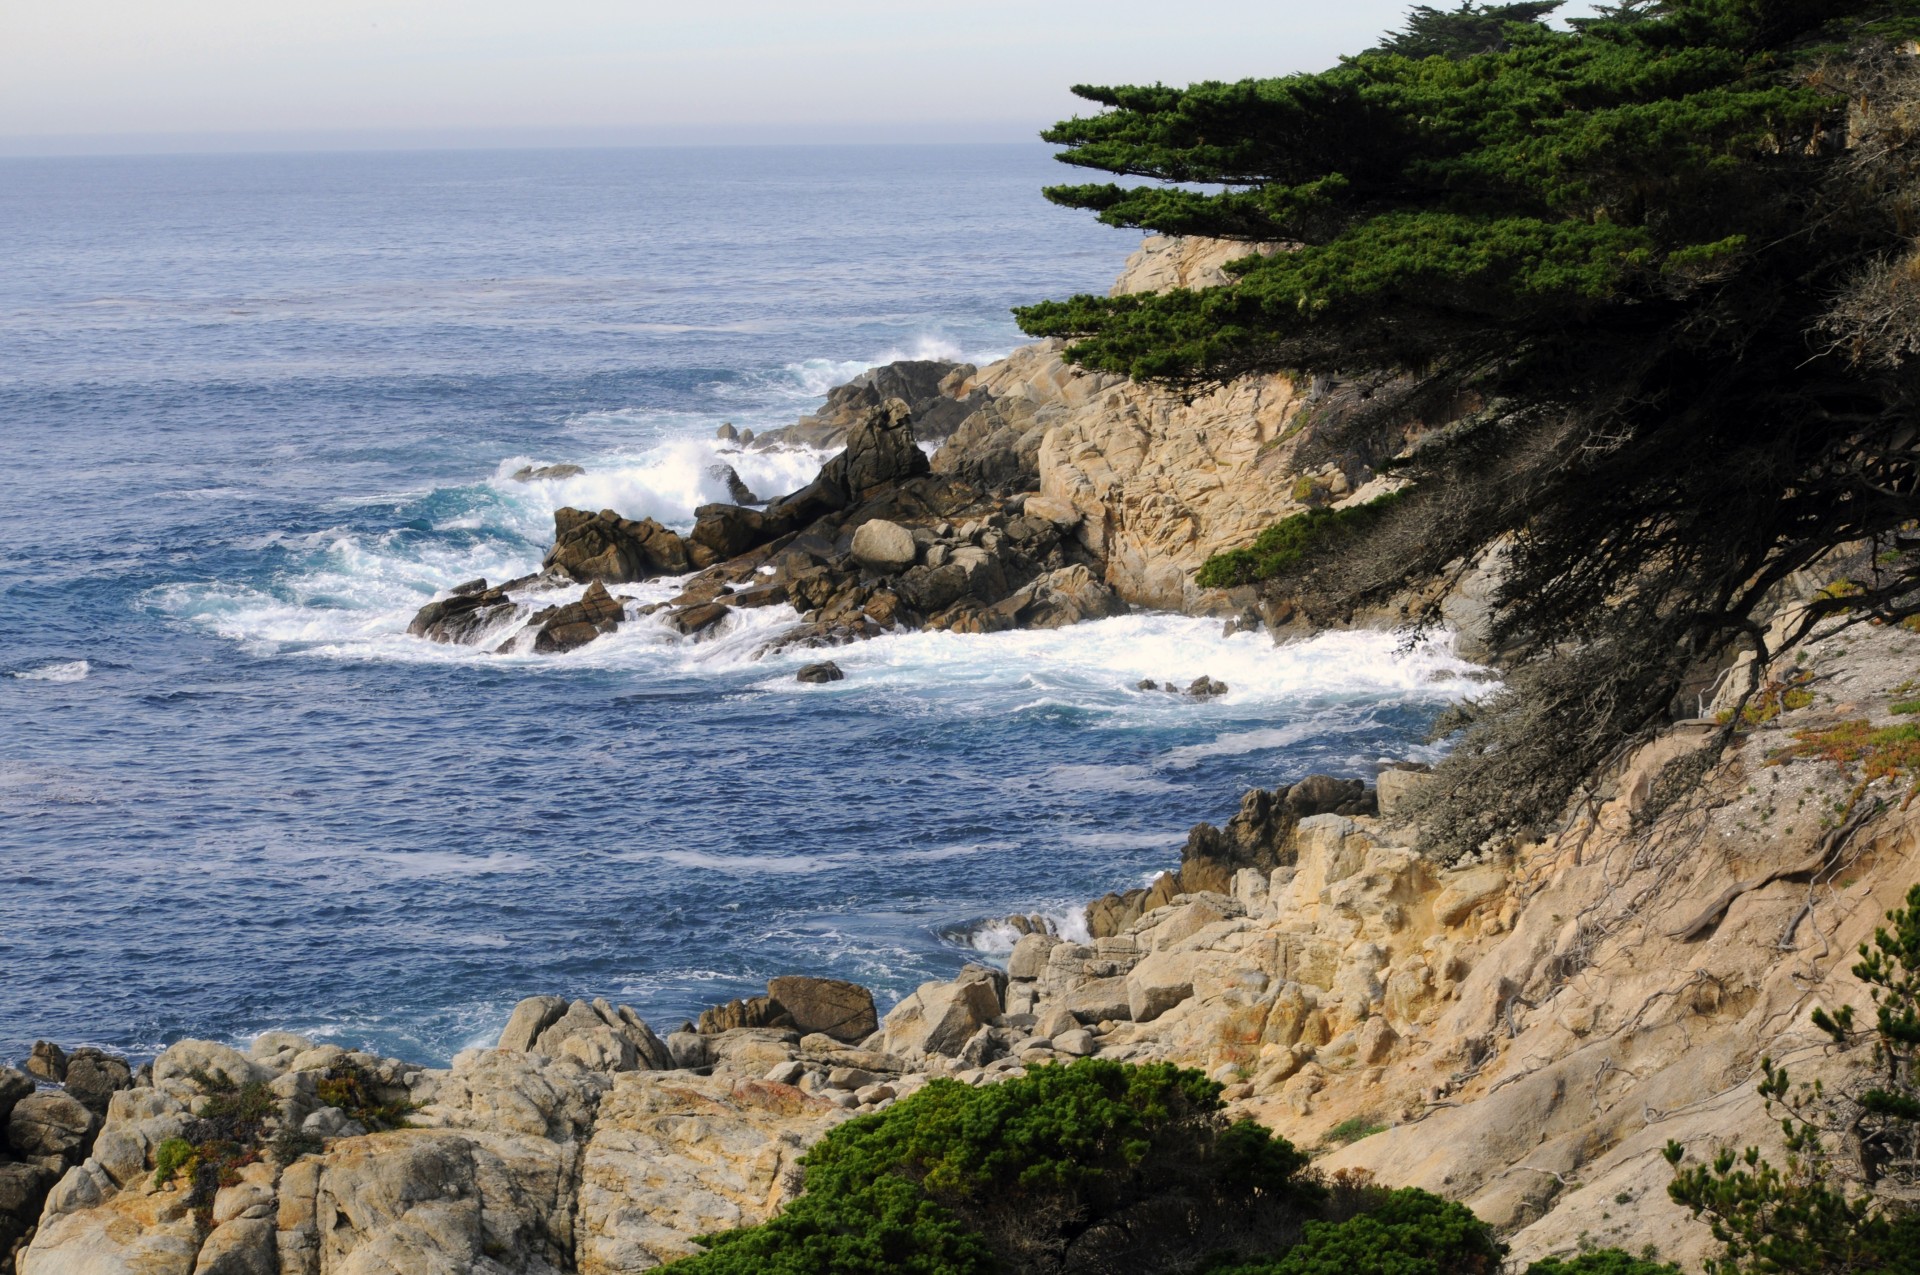 waves crash against rocky coast of the 17 mile drive on the Monterey Peninsula, California